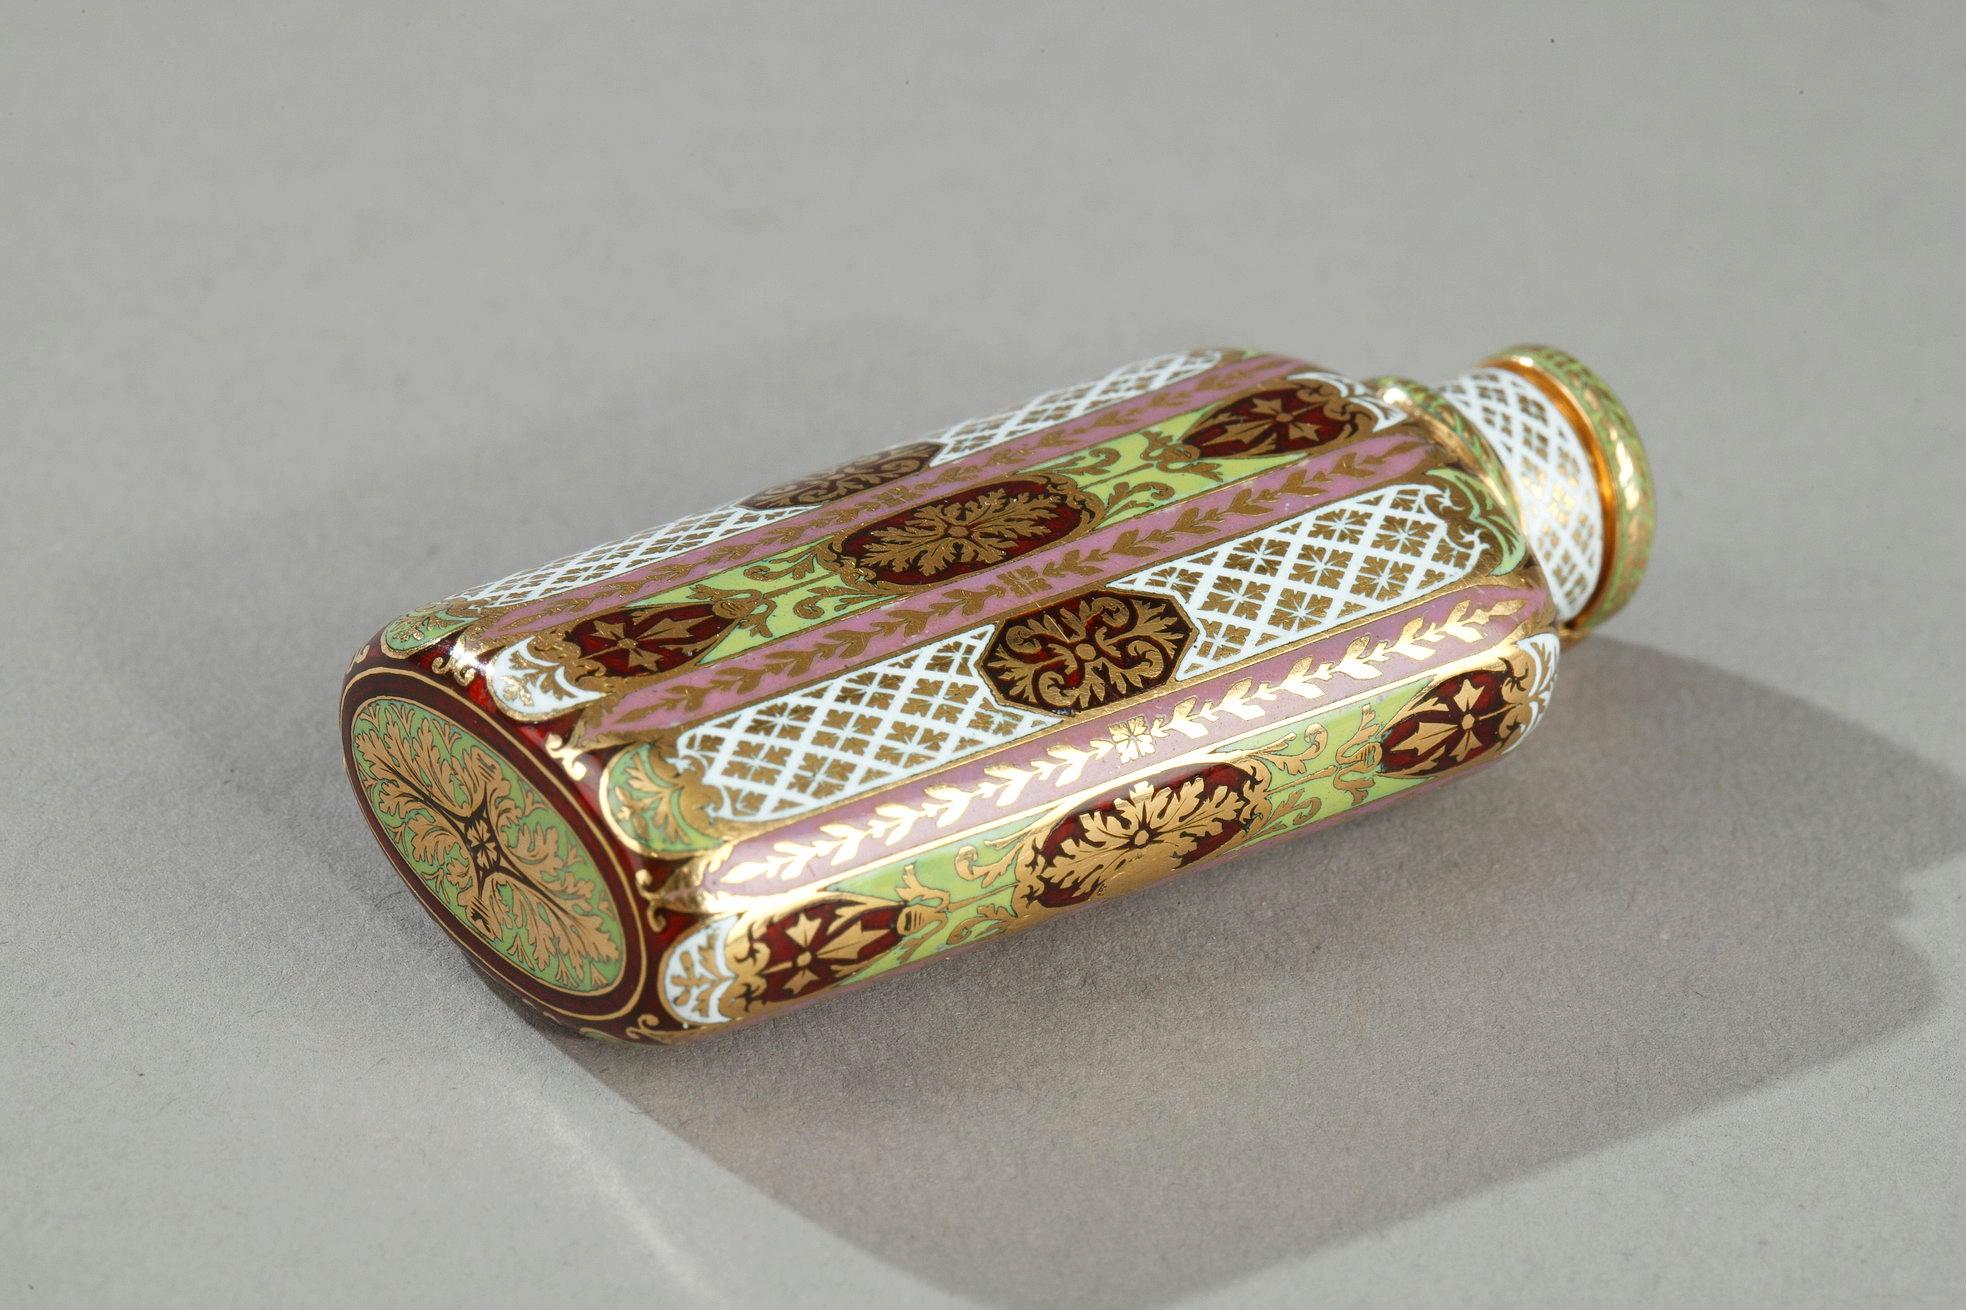 Women's or Men's Scent, Perfume Bottle with Enameled Gold, Restauration Period